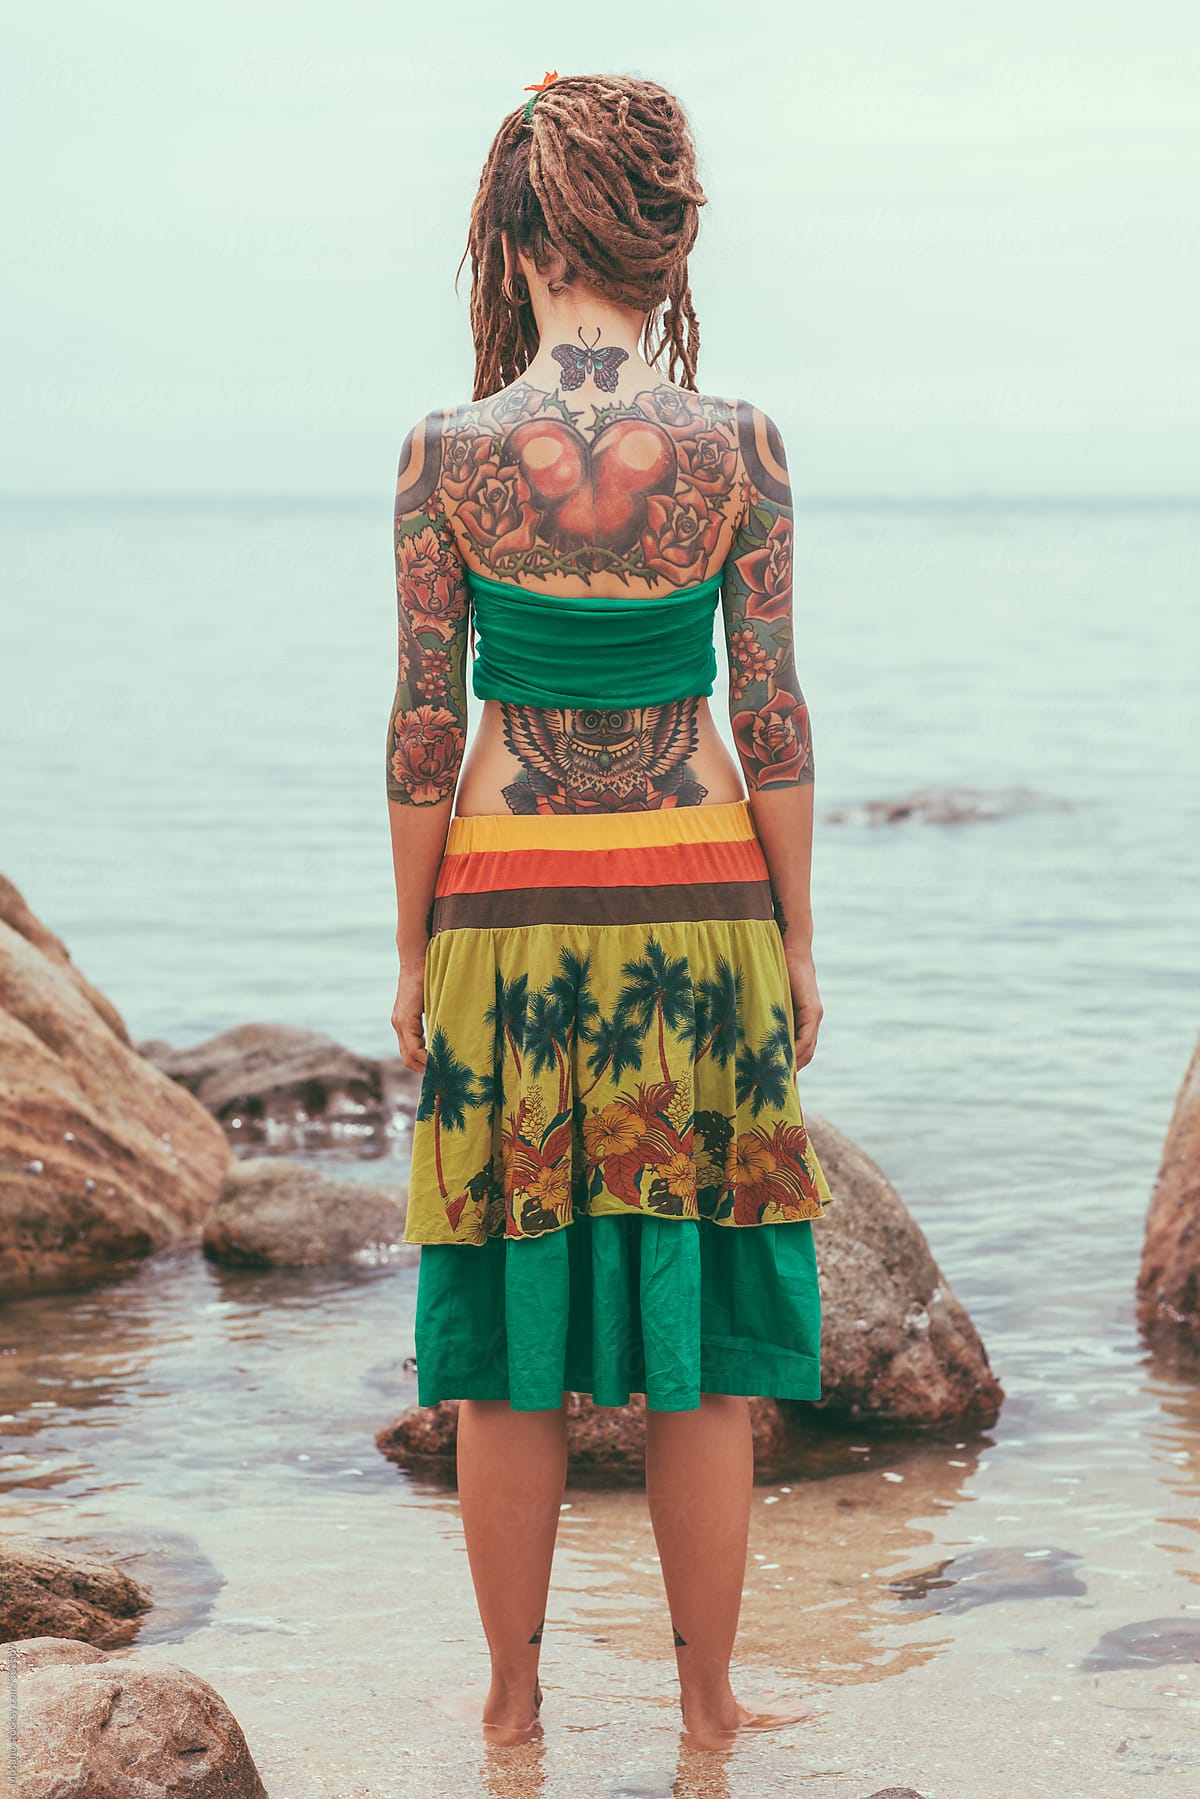 Tattooed Woman Standing at the Beach